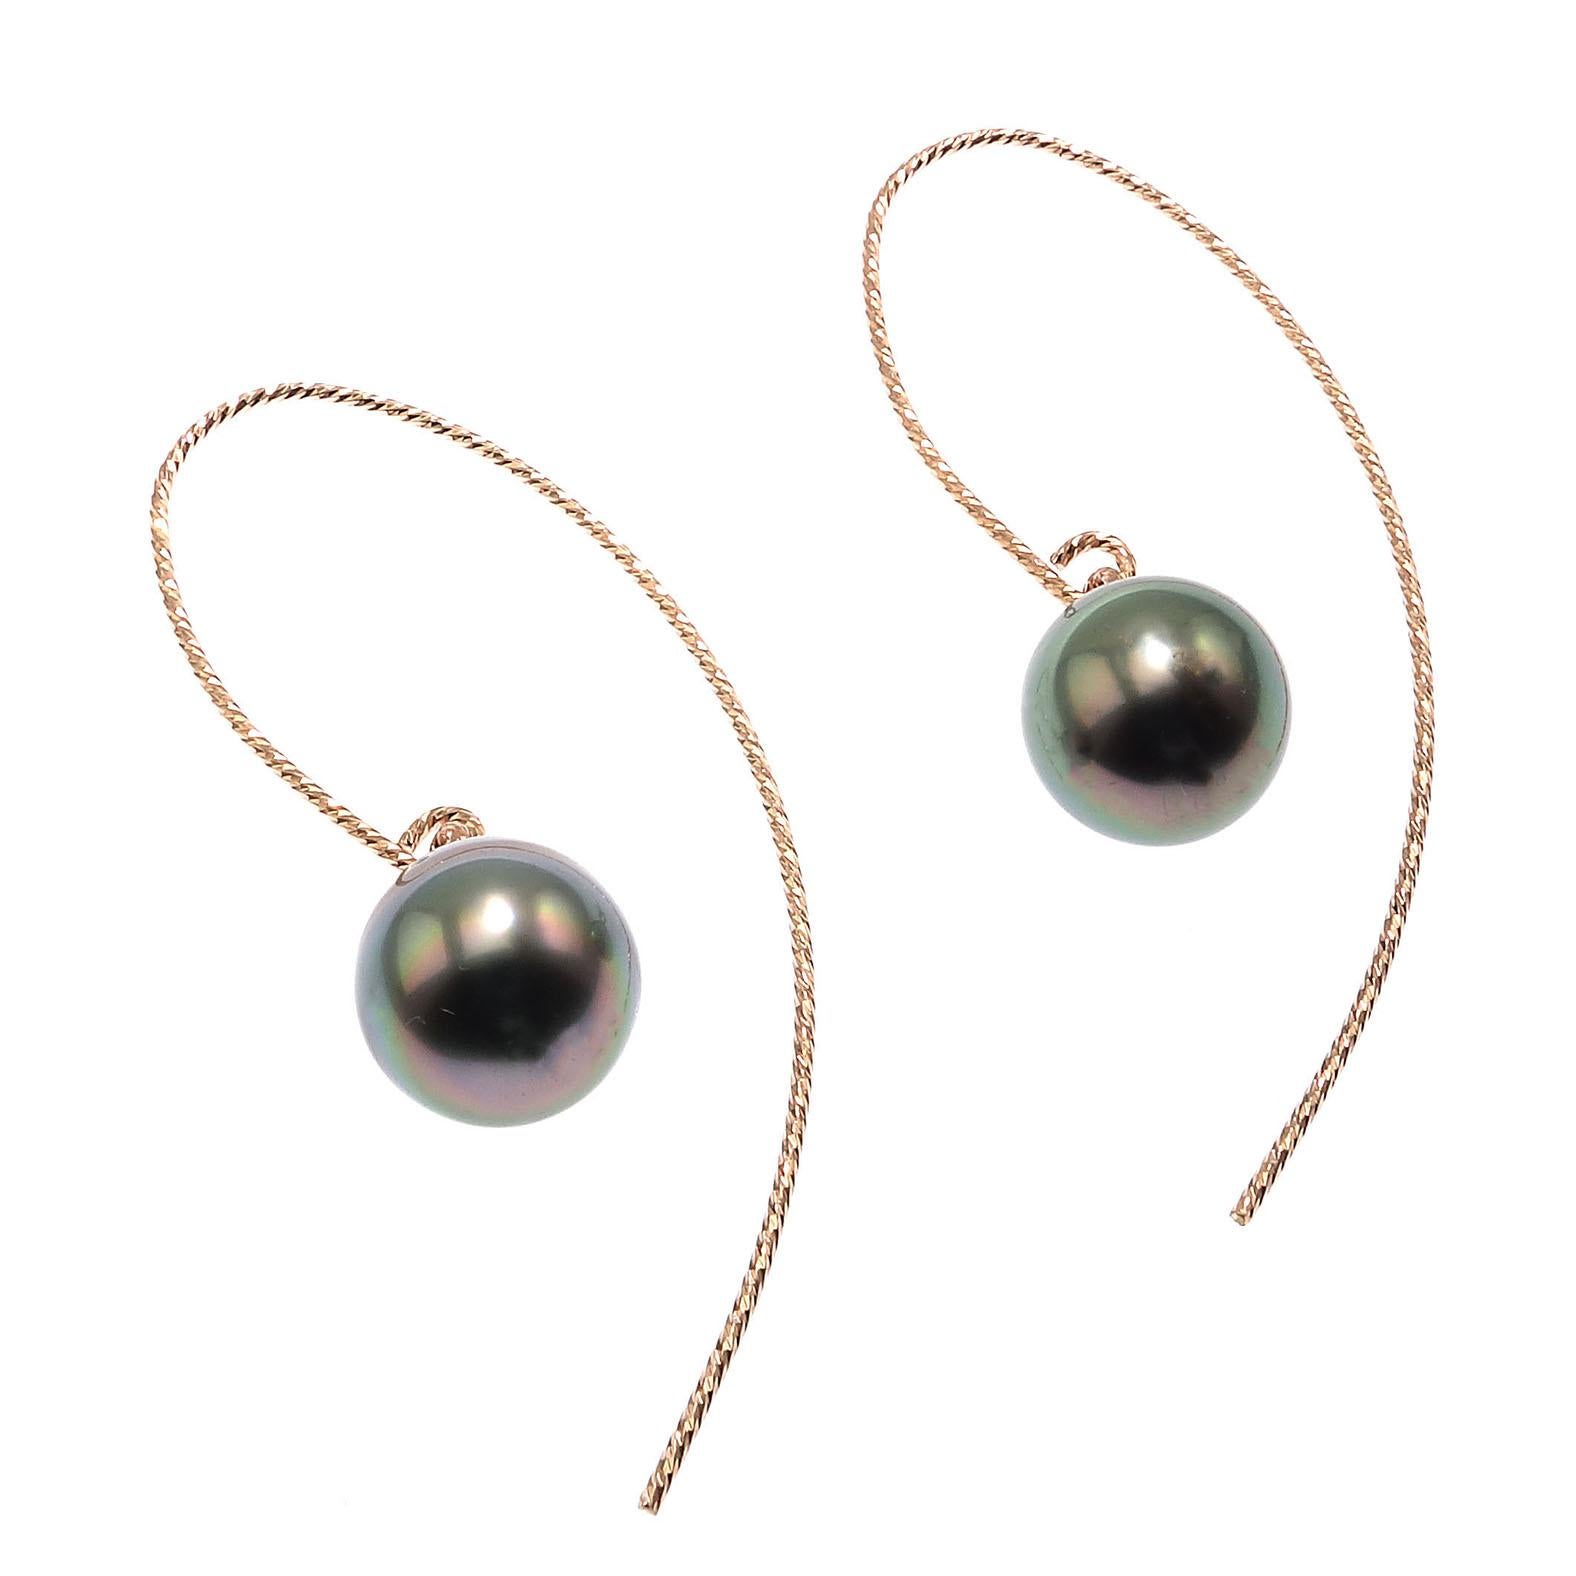 Elegant Earrings of Gray Round Pearls Dangling from Rose Sterling Silver hooks